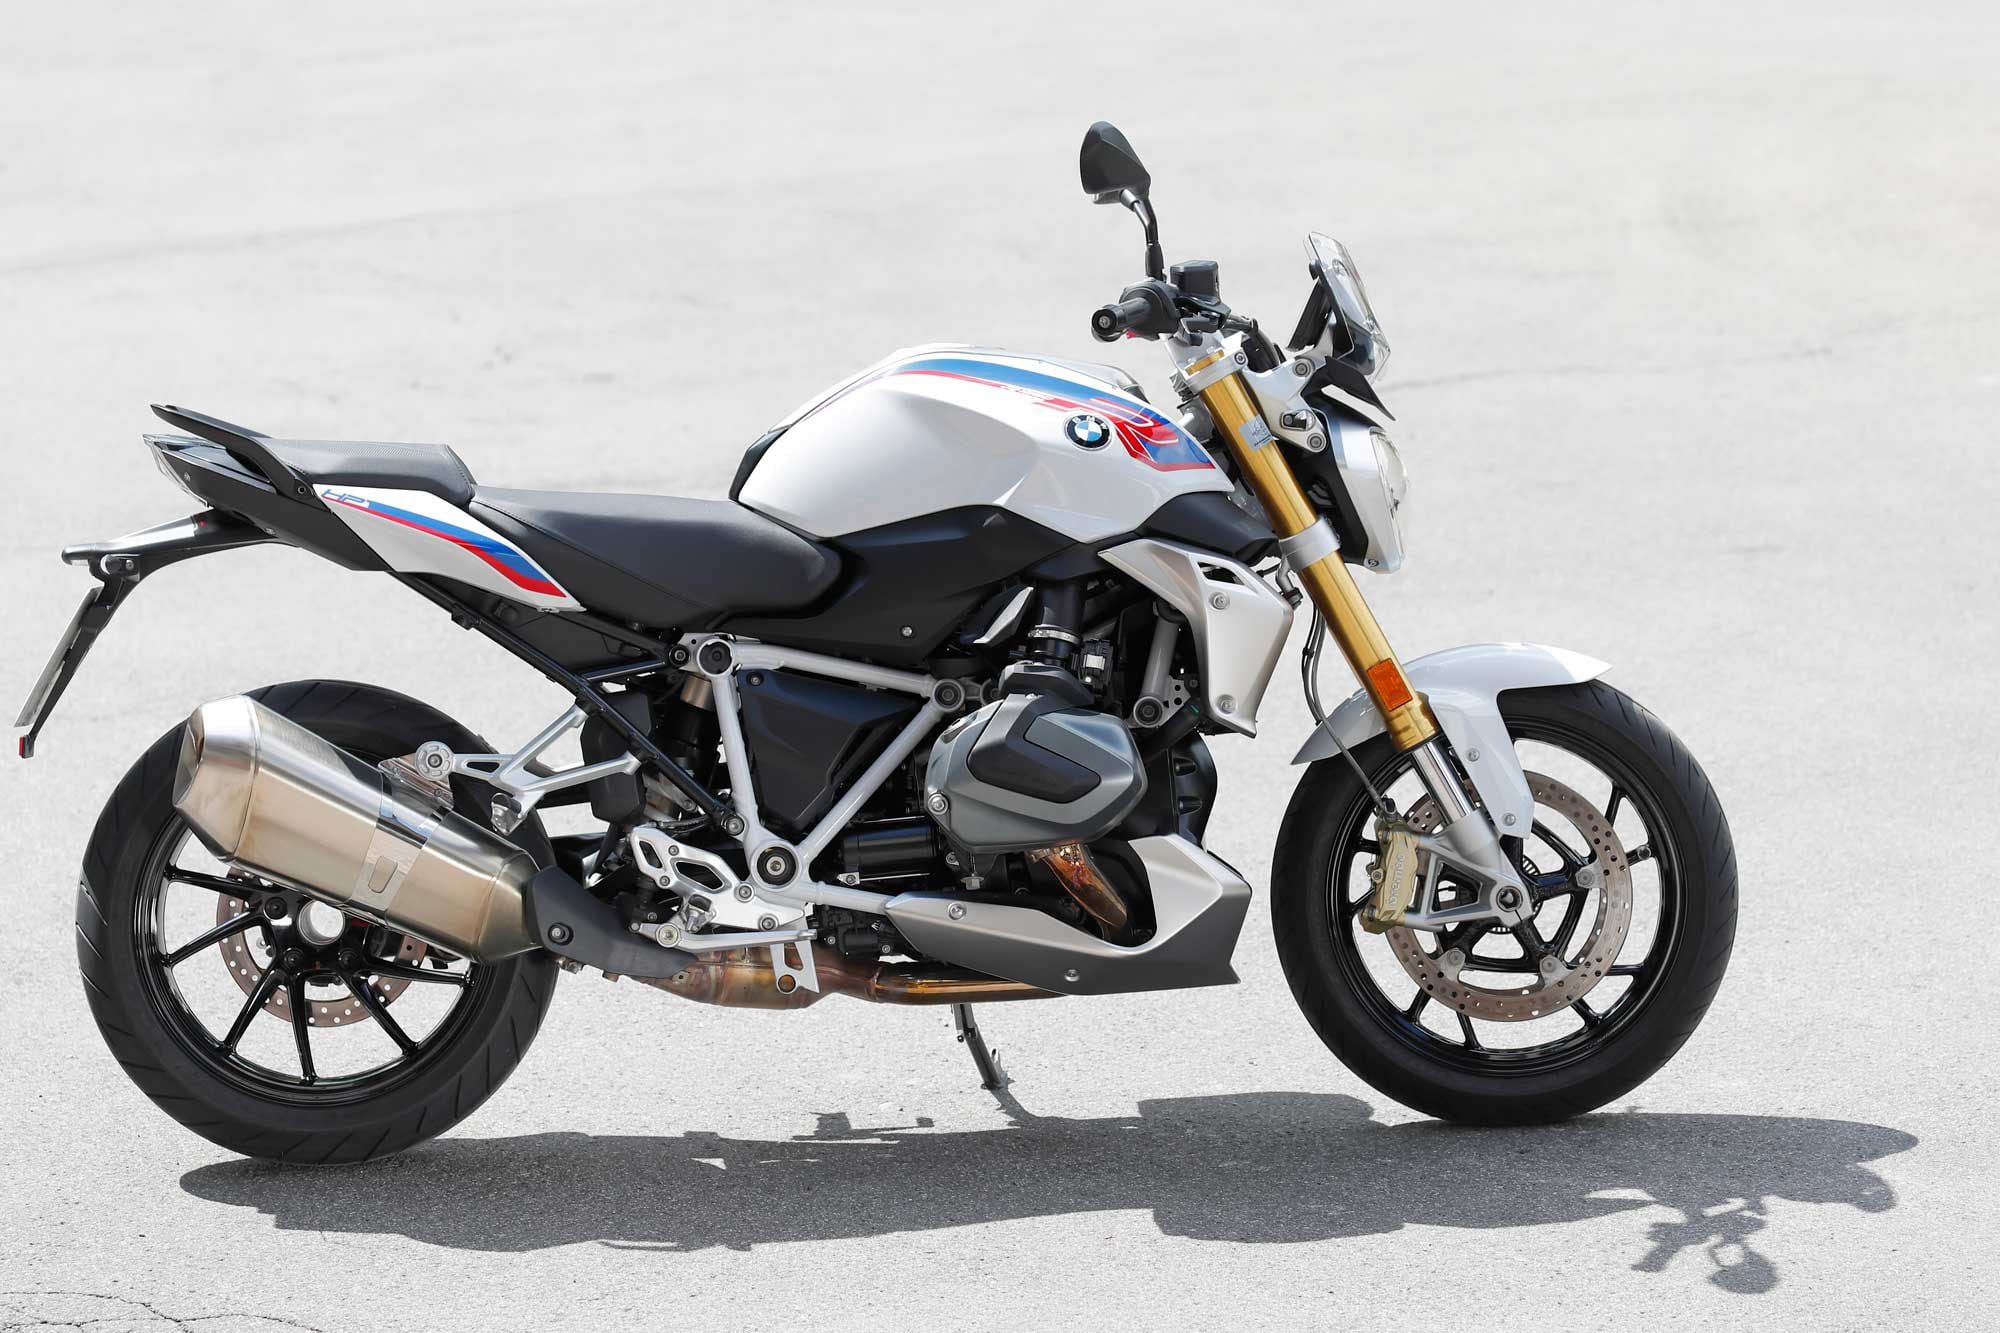 The documents show that the BMW R 1250 R is also getting minor updates for 2023.